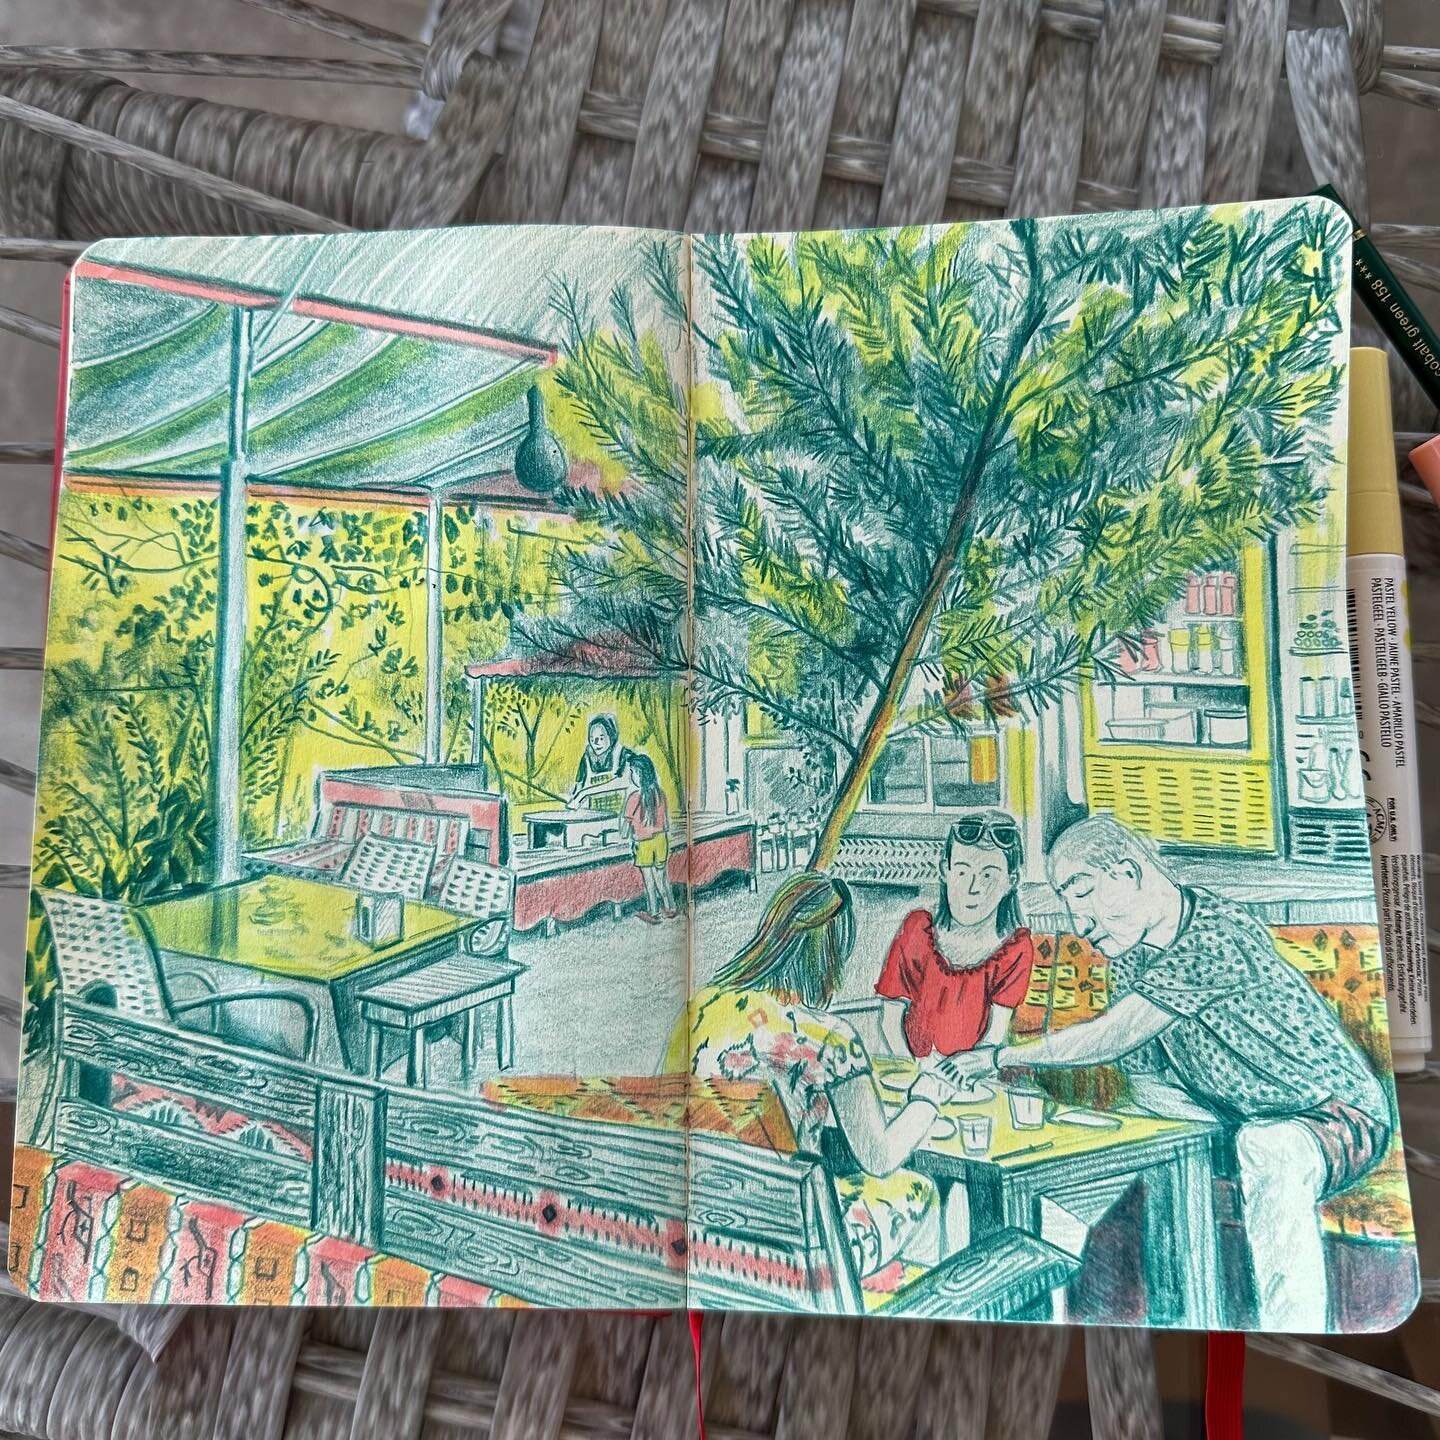 Lovely Turkish brunch followed by an afternoon drawing, enjoying using some different colours and a mixture of pencil crayon and brush pens - neither of which melted ☀️
&bull;
&bull;
&bull;
#walktosee #observationaldrawing #drawdrawdraw #sketchbookdr